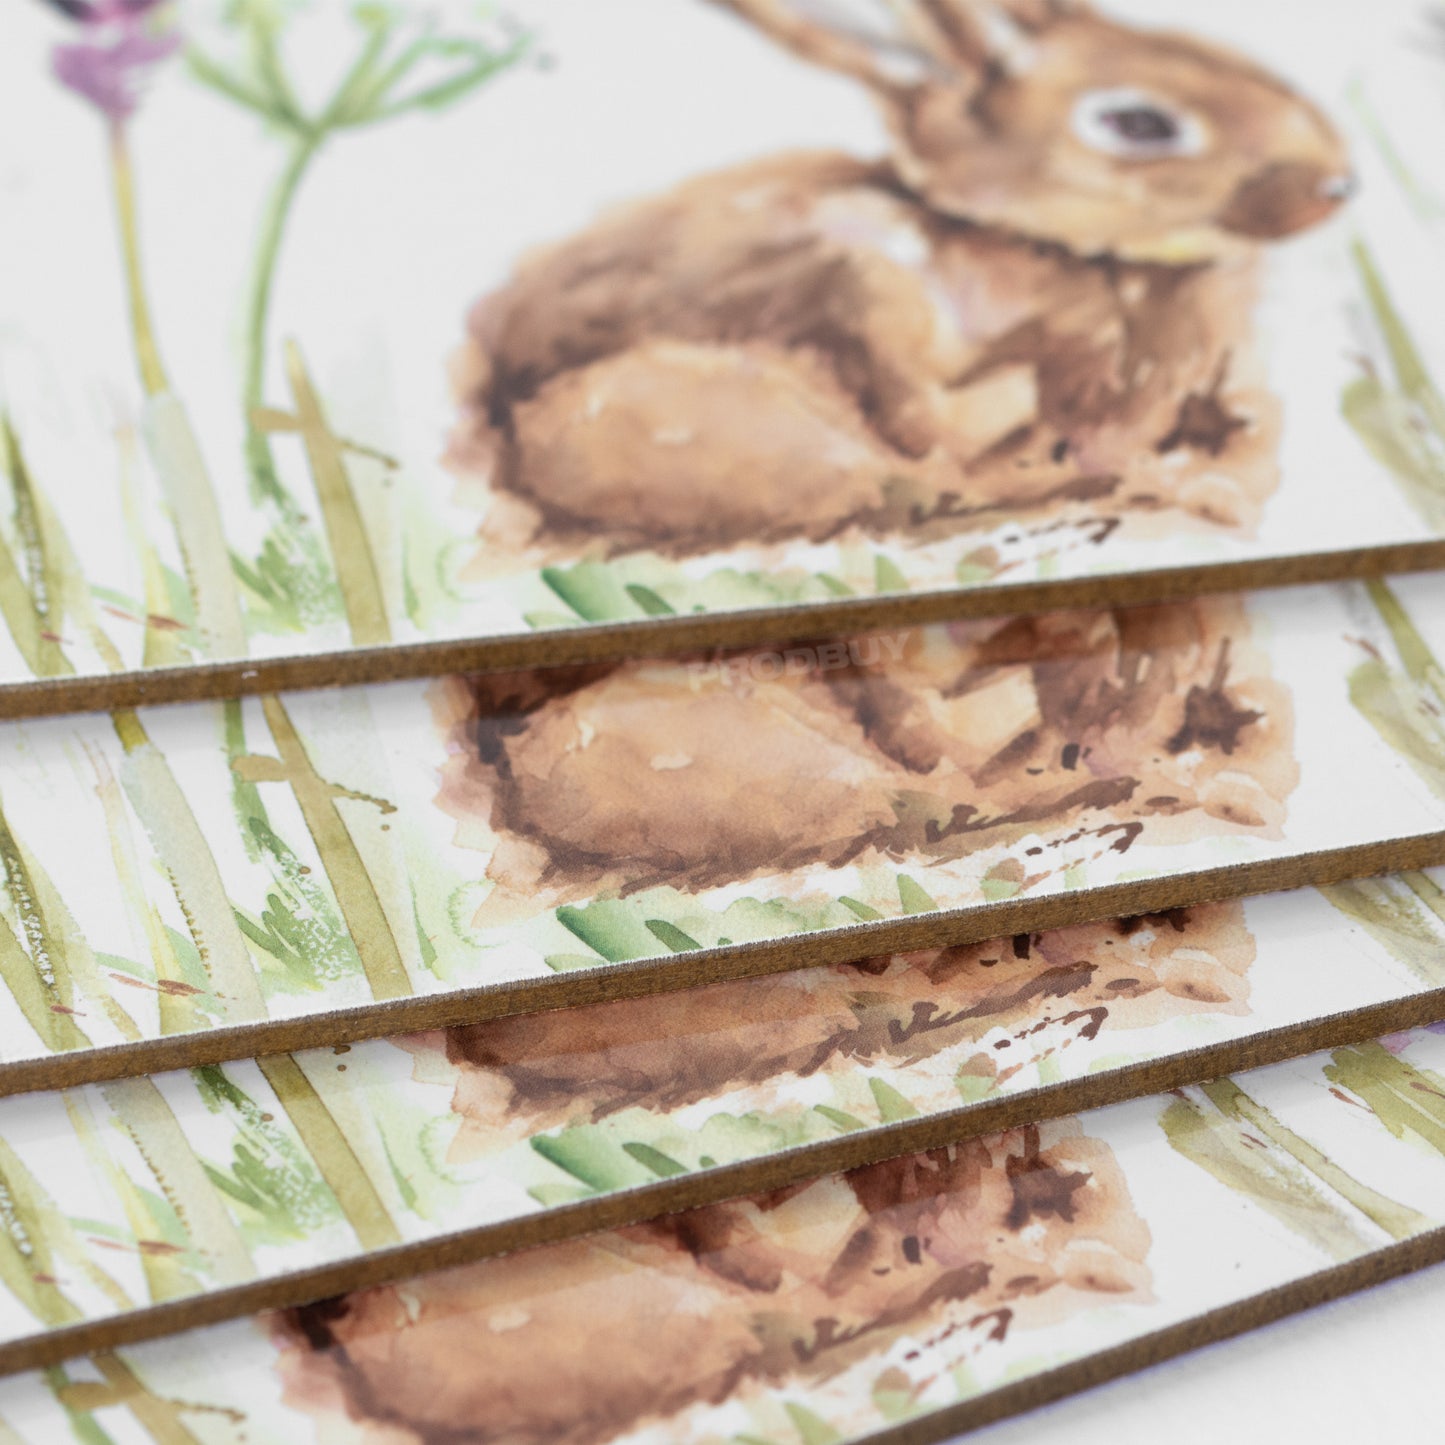 Set of 4 Placemats & 4 Coasters with Floral Hares